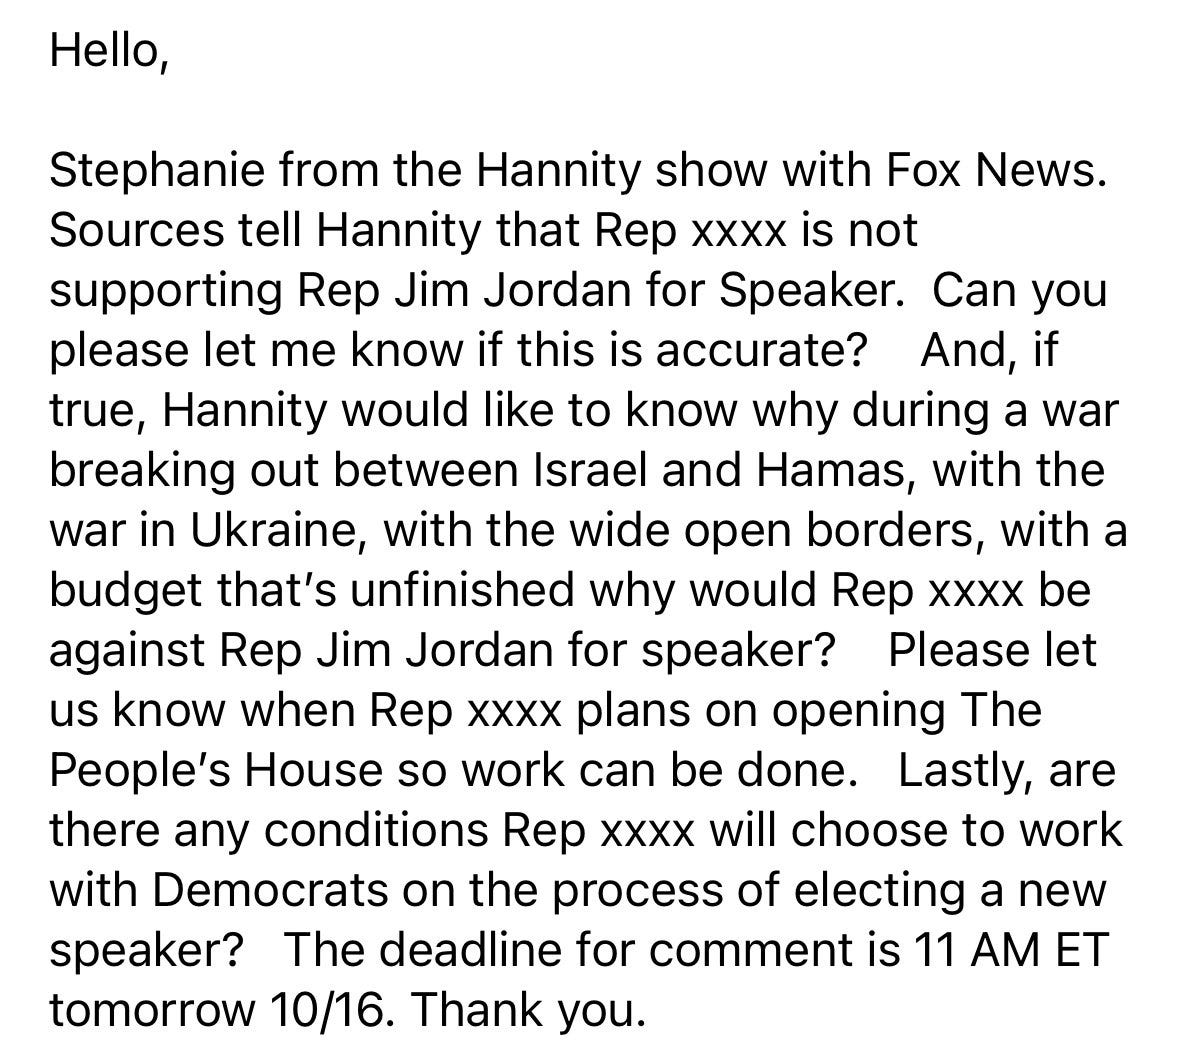 Hello,  Stephanie from the Hannity show with Fox News. Sources tell Hannity that Rep xxxx is not supporting Rep Jim Jordan for Speaker. Can you please let me know if this is accurate? And, if true, Hannity would like to know why during a war breaking out between Israel and Hamas, with the war in Ukraine, with the wide open borders, with a budget, that’s unfinished why would Rep xxxx be against Rep Jim Jordan for speaker? Please let us know when Rep xxxx plans on opening The People’s House so work can be done. Lastly, are there any conditions Rep xxxx will choose to work with Democrats on the process of electing a new speaker? The deadline for comment is 11 AM ET tomorrow 10/16. Thank you. 